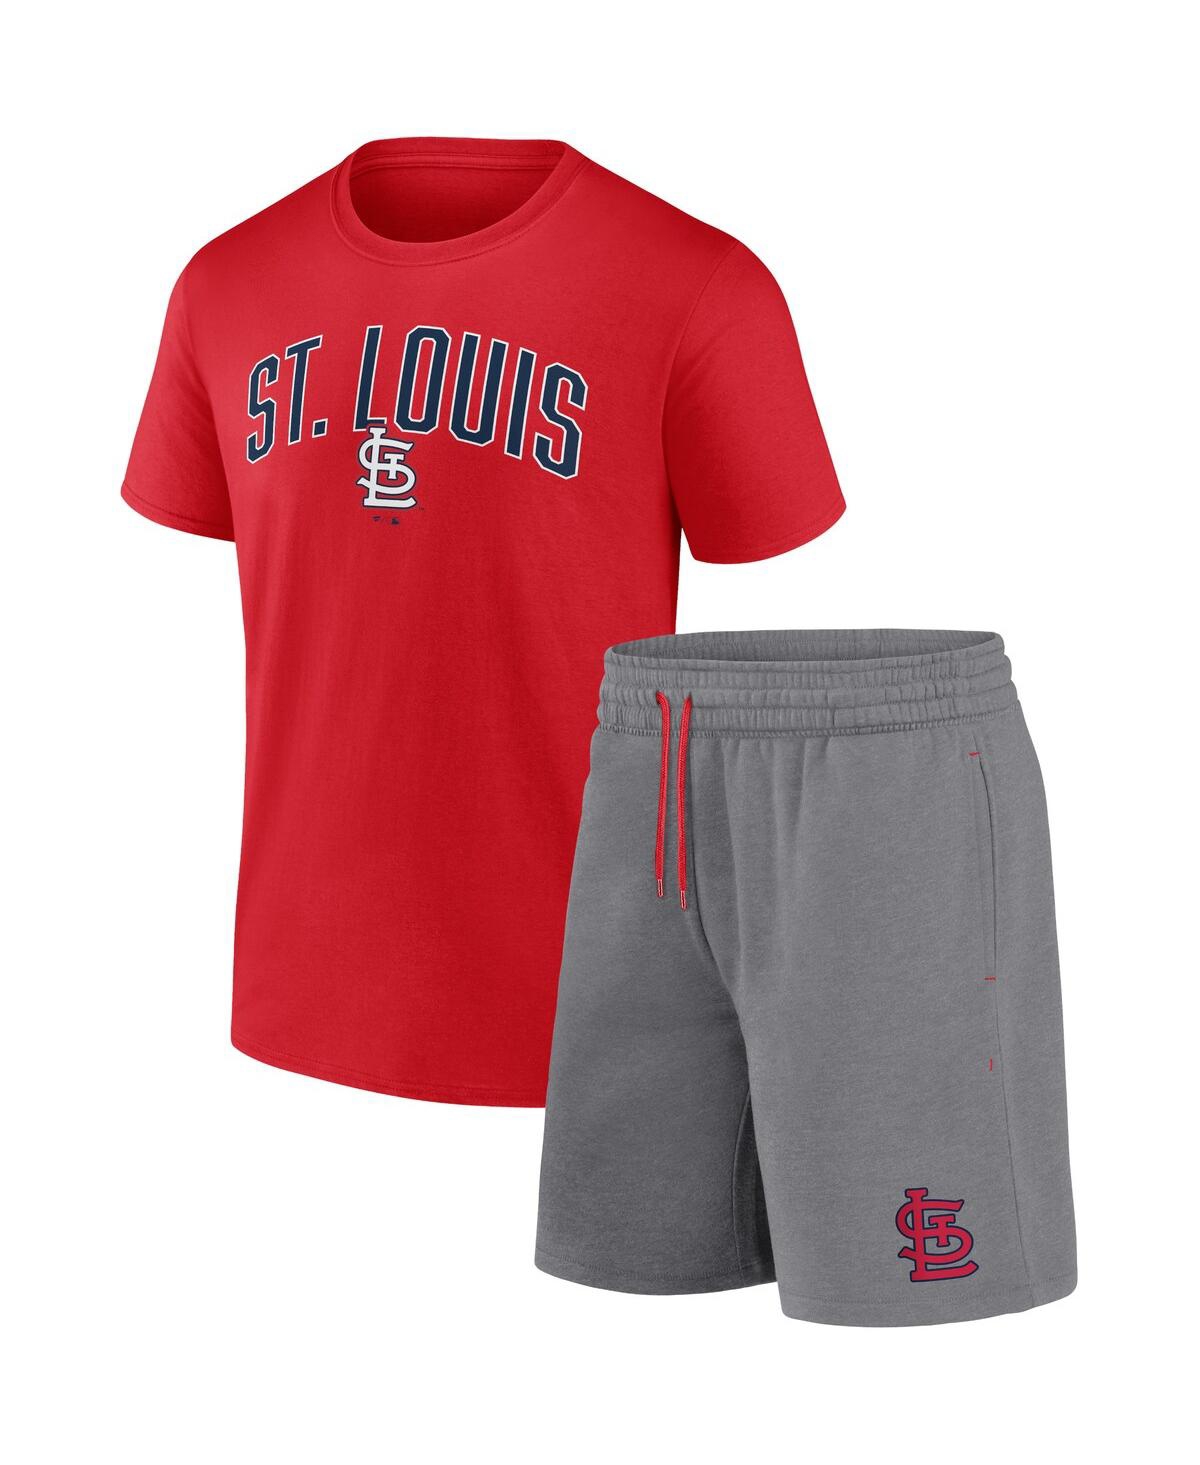 Men's Fanatics Branded Heather Red St. Louis Cardinals Down the